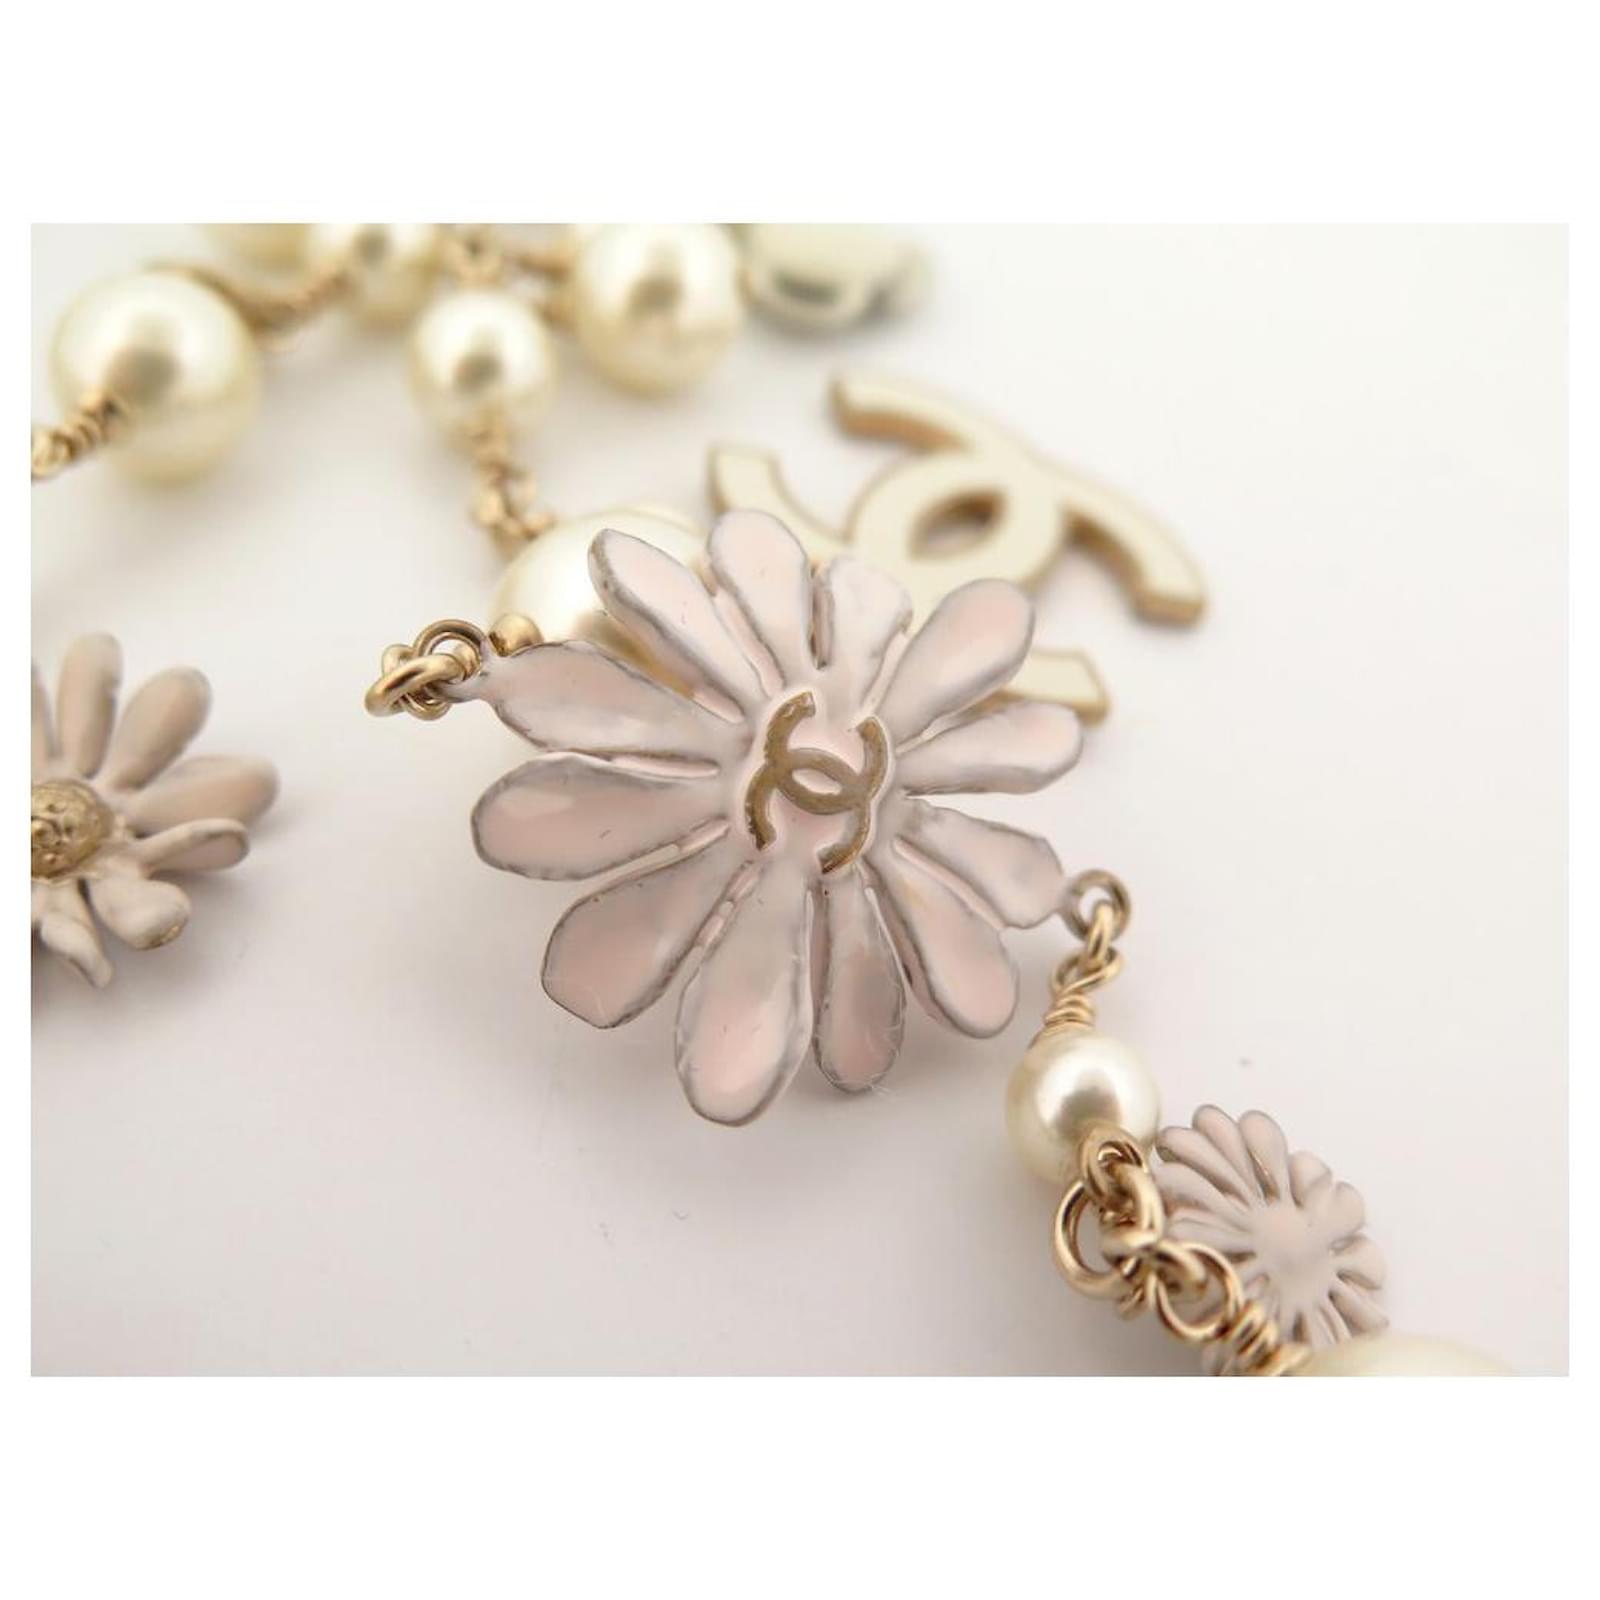 NEW CHANEL NECKLACE LOGO CC FLOWERS CAMELIA & DAISIES NECKLACE Golden ...